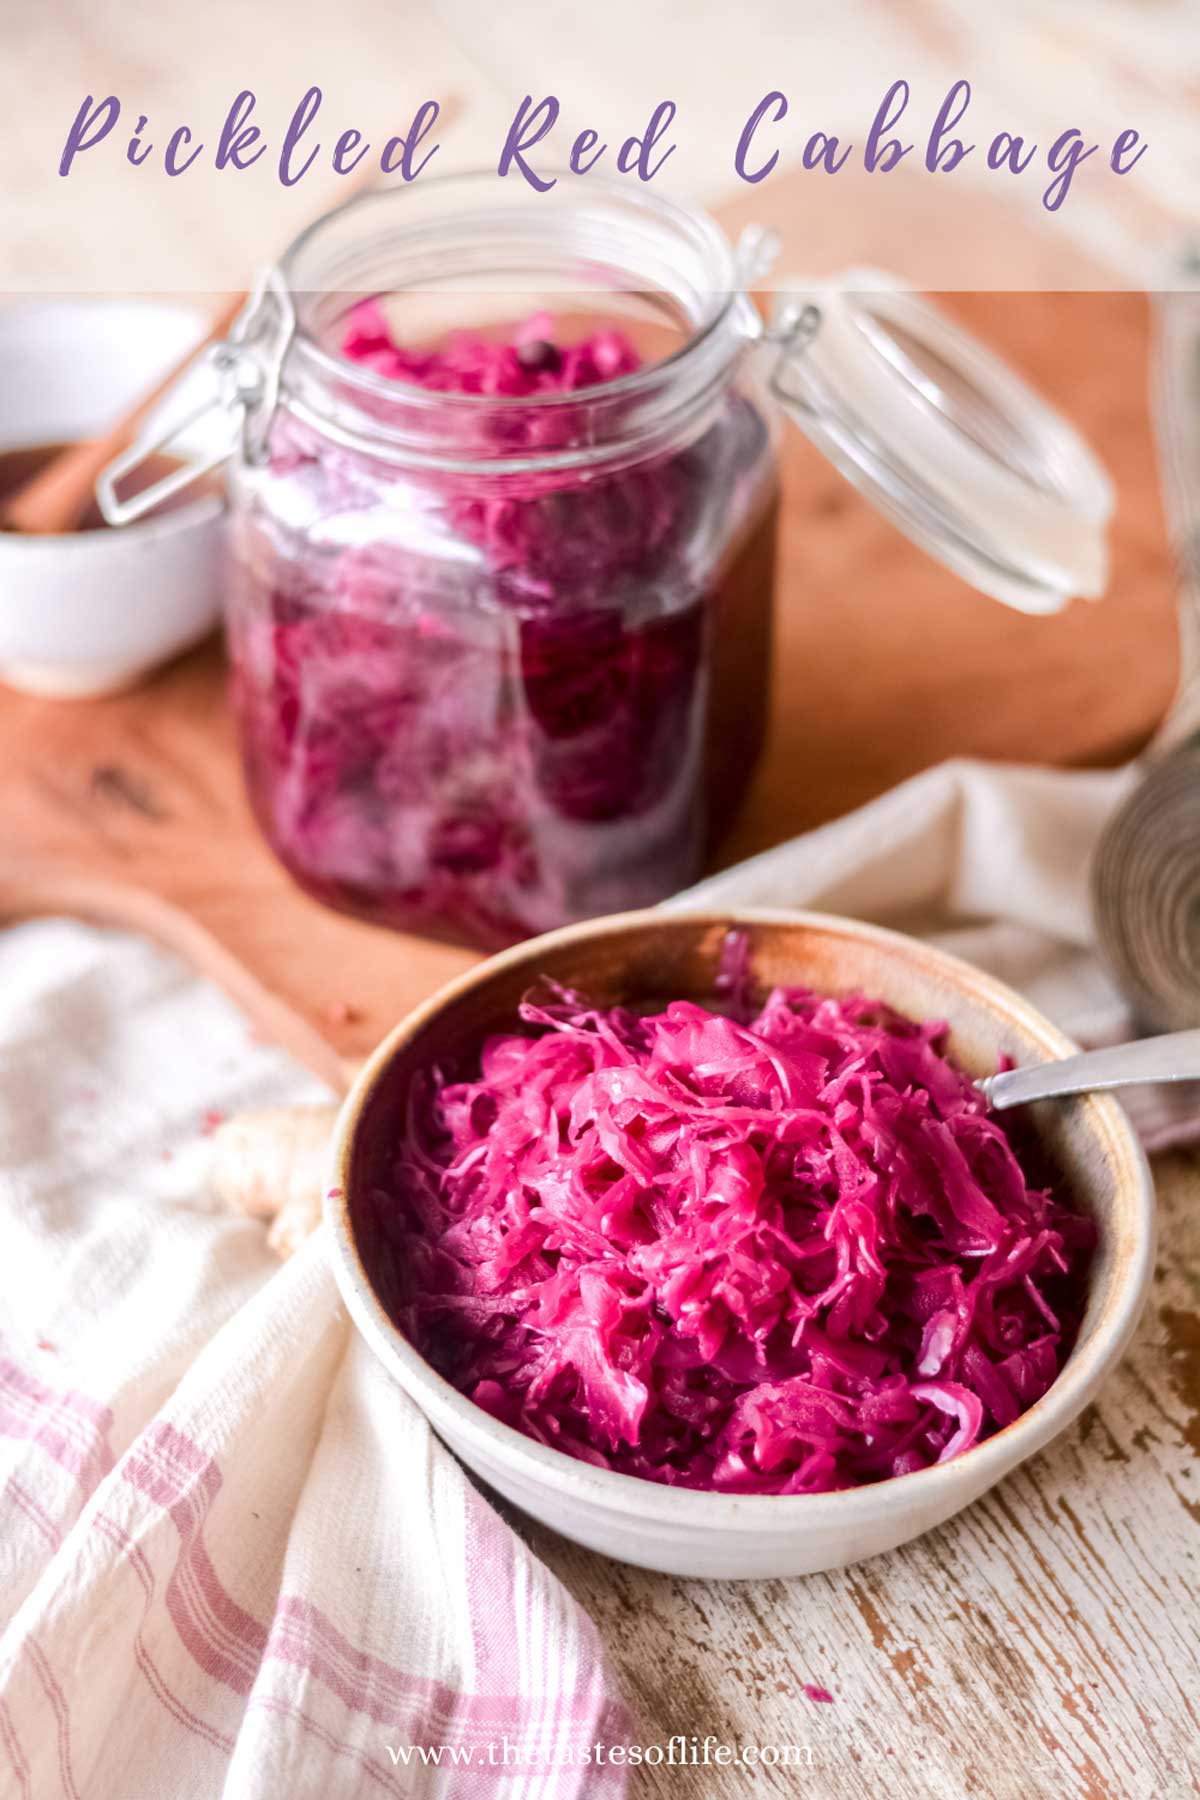 How to Make Pickled Red Cabbage